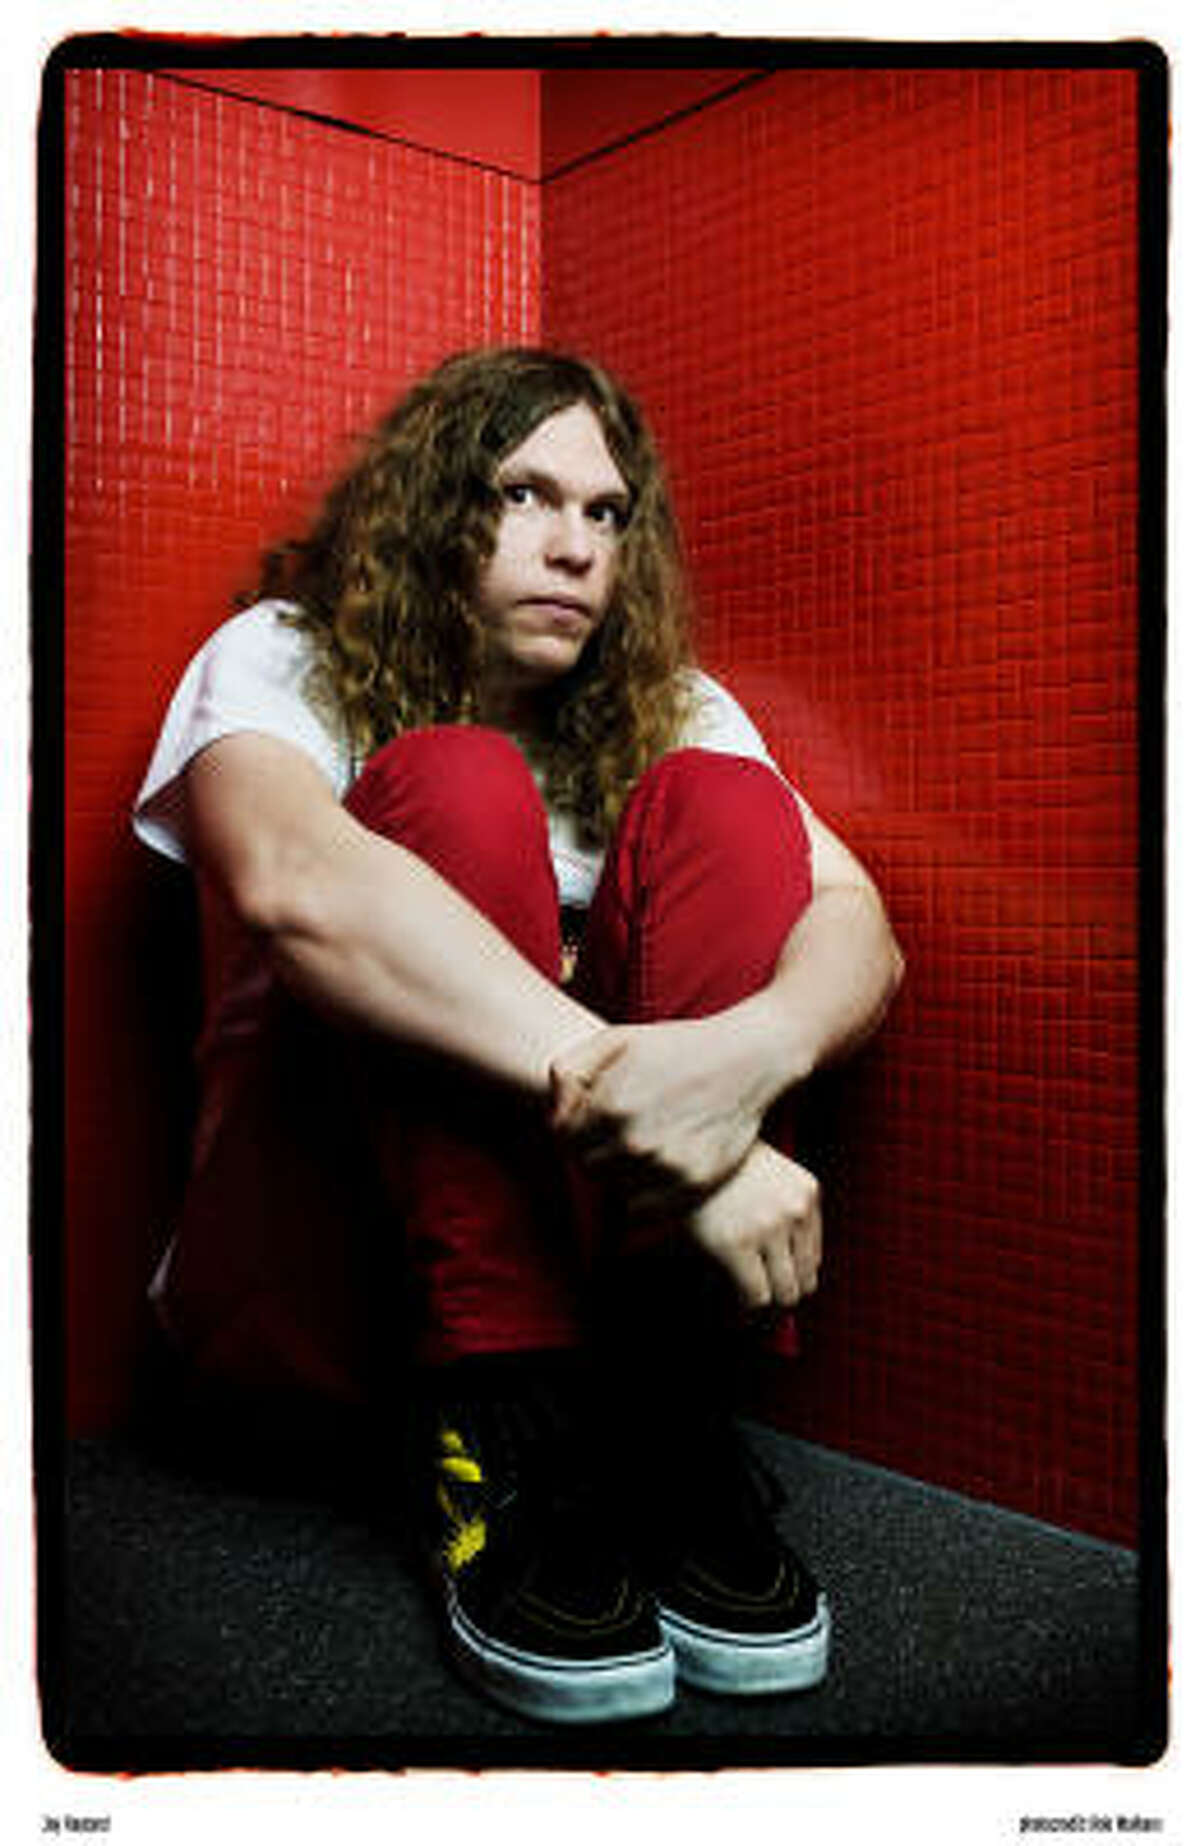 Jimmy Lee Lindsey, a Memphis-based indie punk musician who recorded and performed as Jay Reatard, has died at 29. Cause of death had not yet been determined.